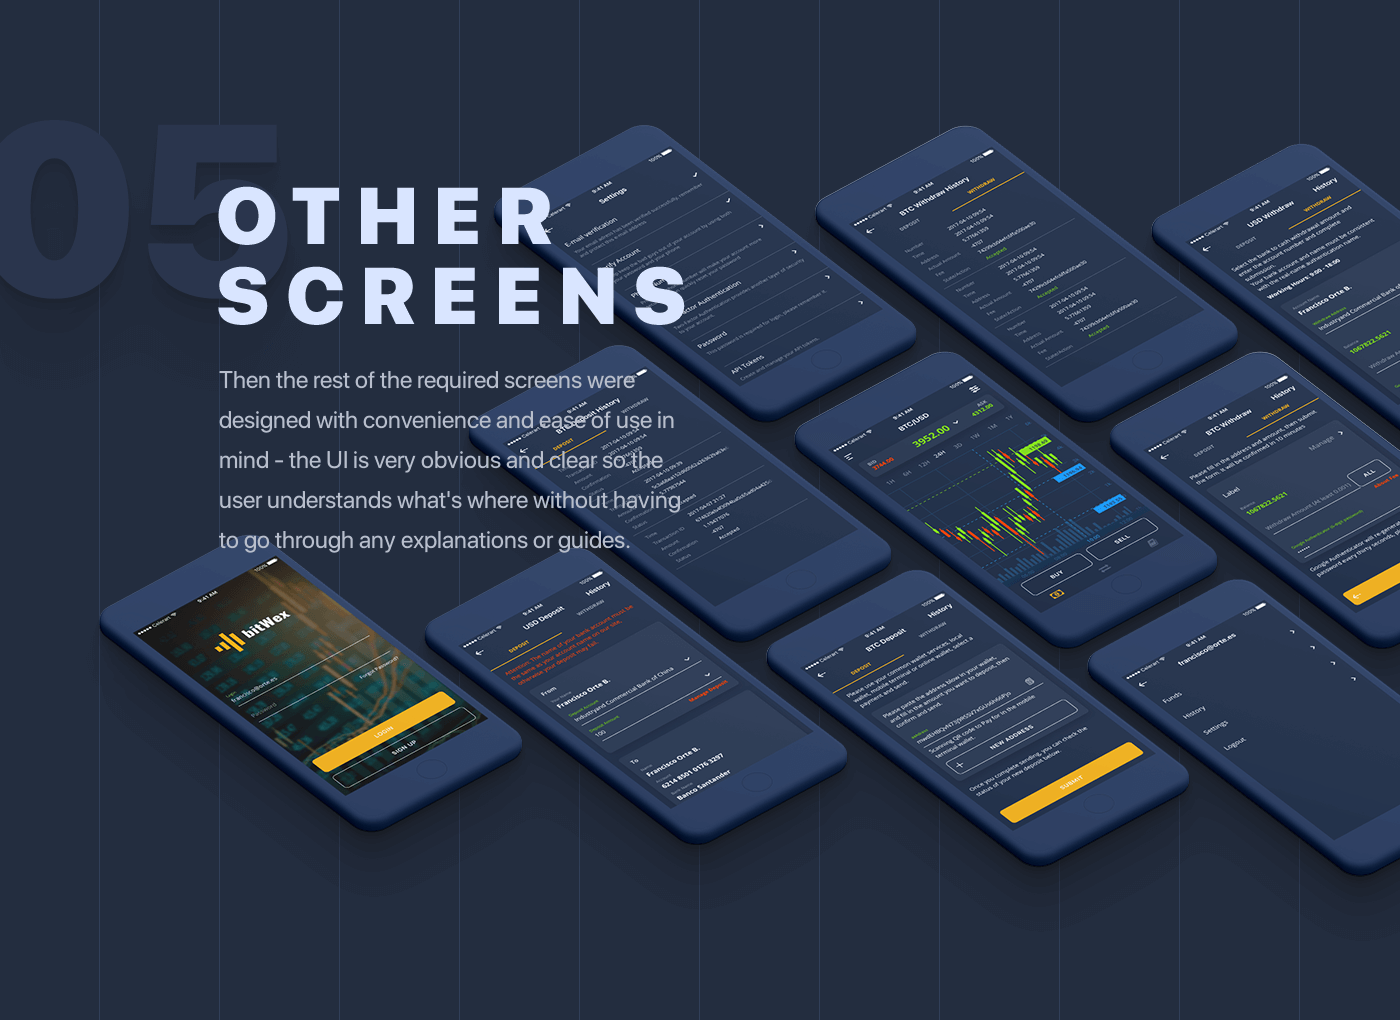 app cryptocurrency bitcoin ethereum trading app design UI ux user experience ios